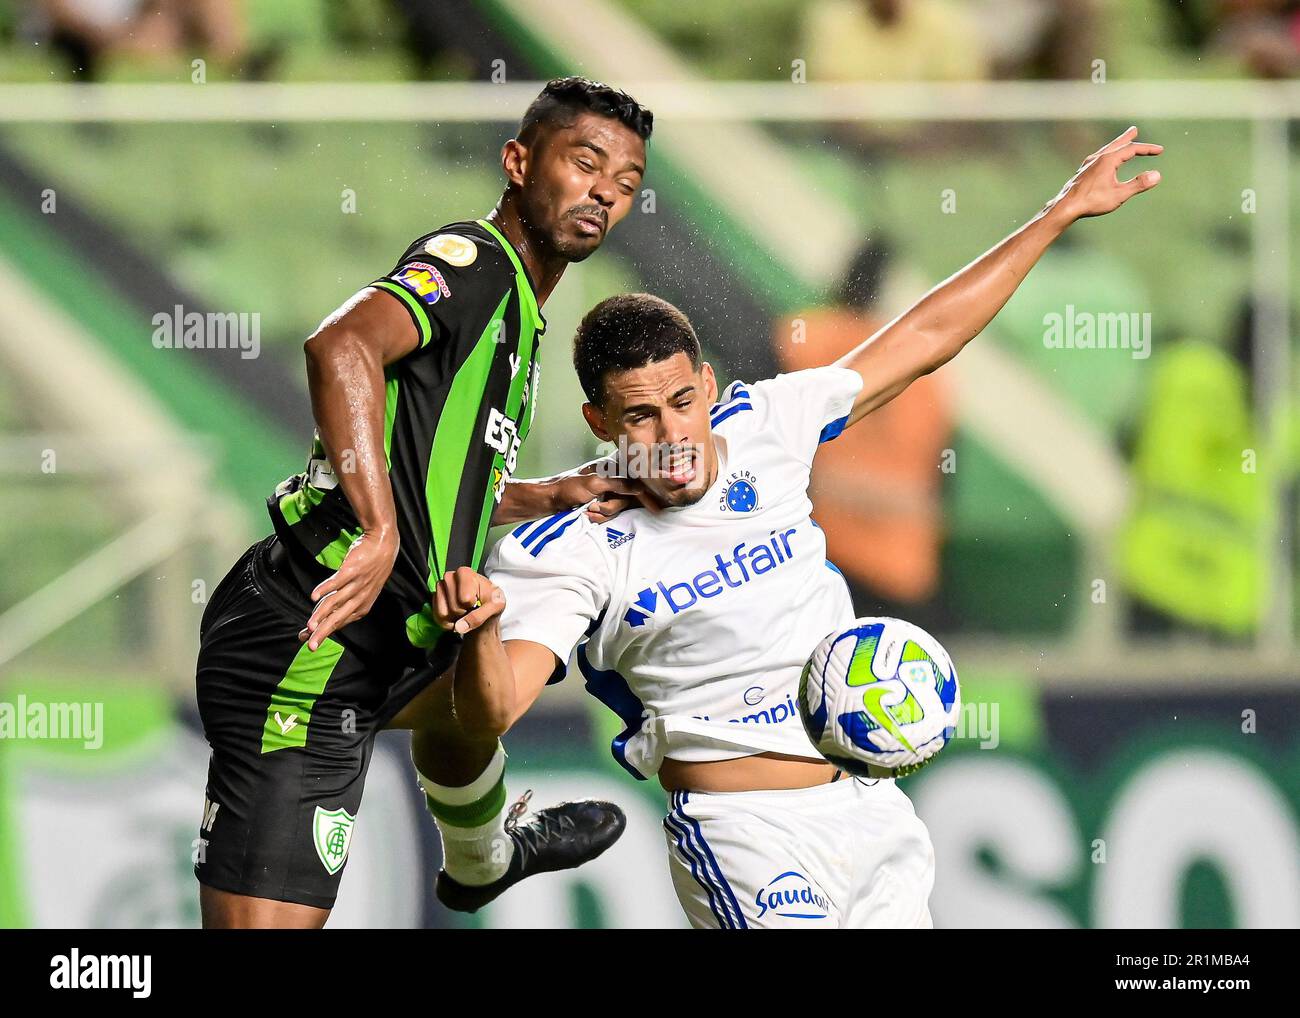 Belo Horizonte, Brazil. 14th May, 2023. Ricardo Silva of America Mineiro battles for possession with Lucas Oliveira of Cruzeiro, during the match between America Mineiro and Cruzeiro, for the Brazilian Serie A 2023, at Arena Independencia Stadium, in Belo Horizonte on May 14. Photo: Gledston Tavares/DiaEsportivo/Alamy Live News Credit: DiaEsportivo/Alamy Live News Stock Photo